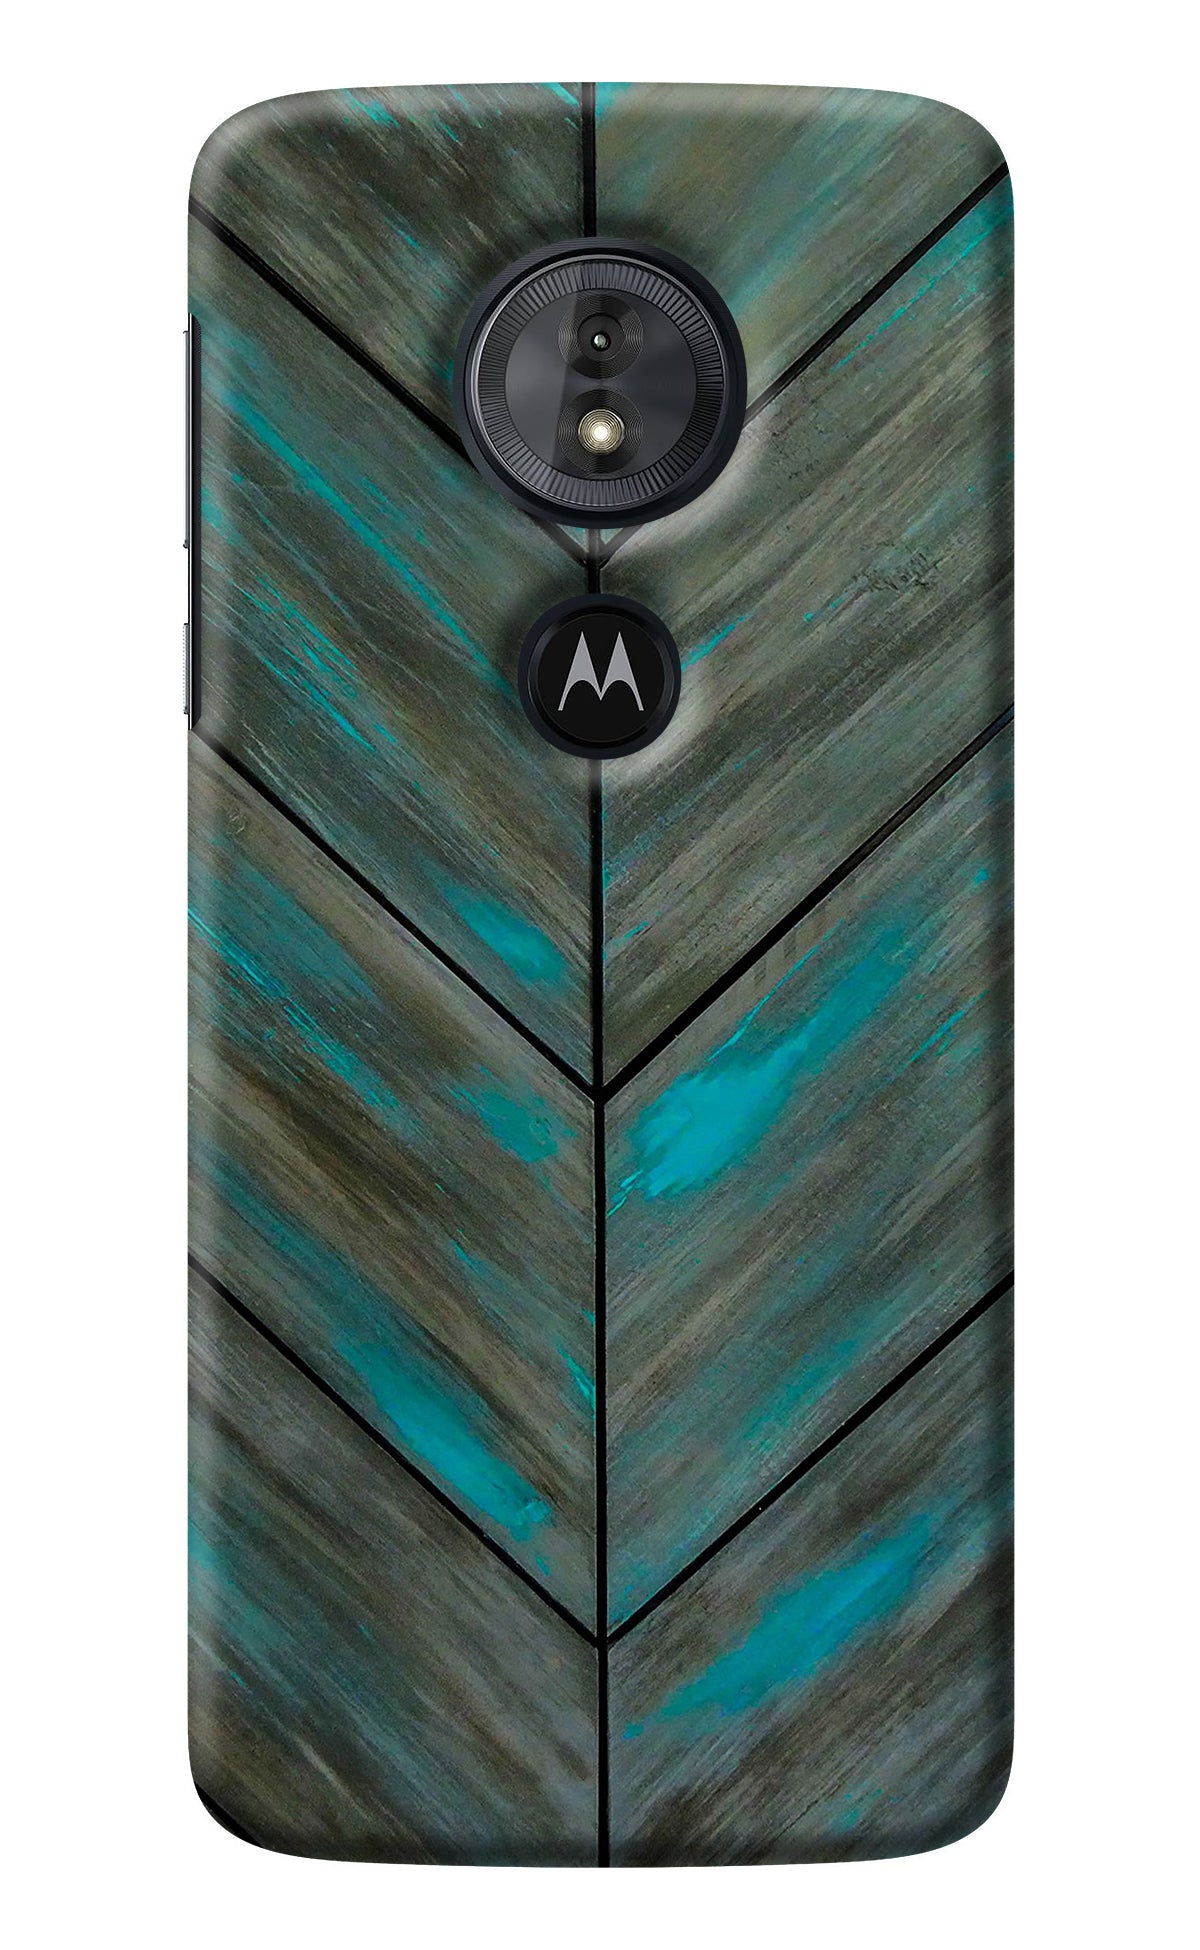 Pattern Moto G6 Play Back Cover